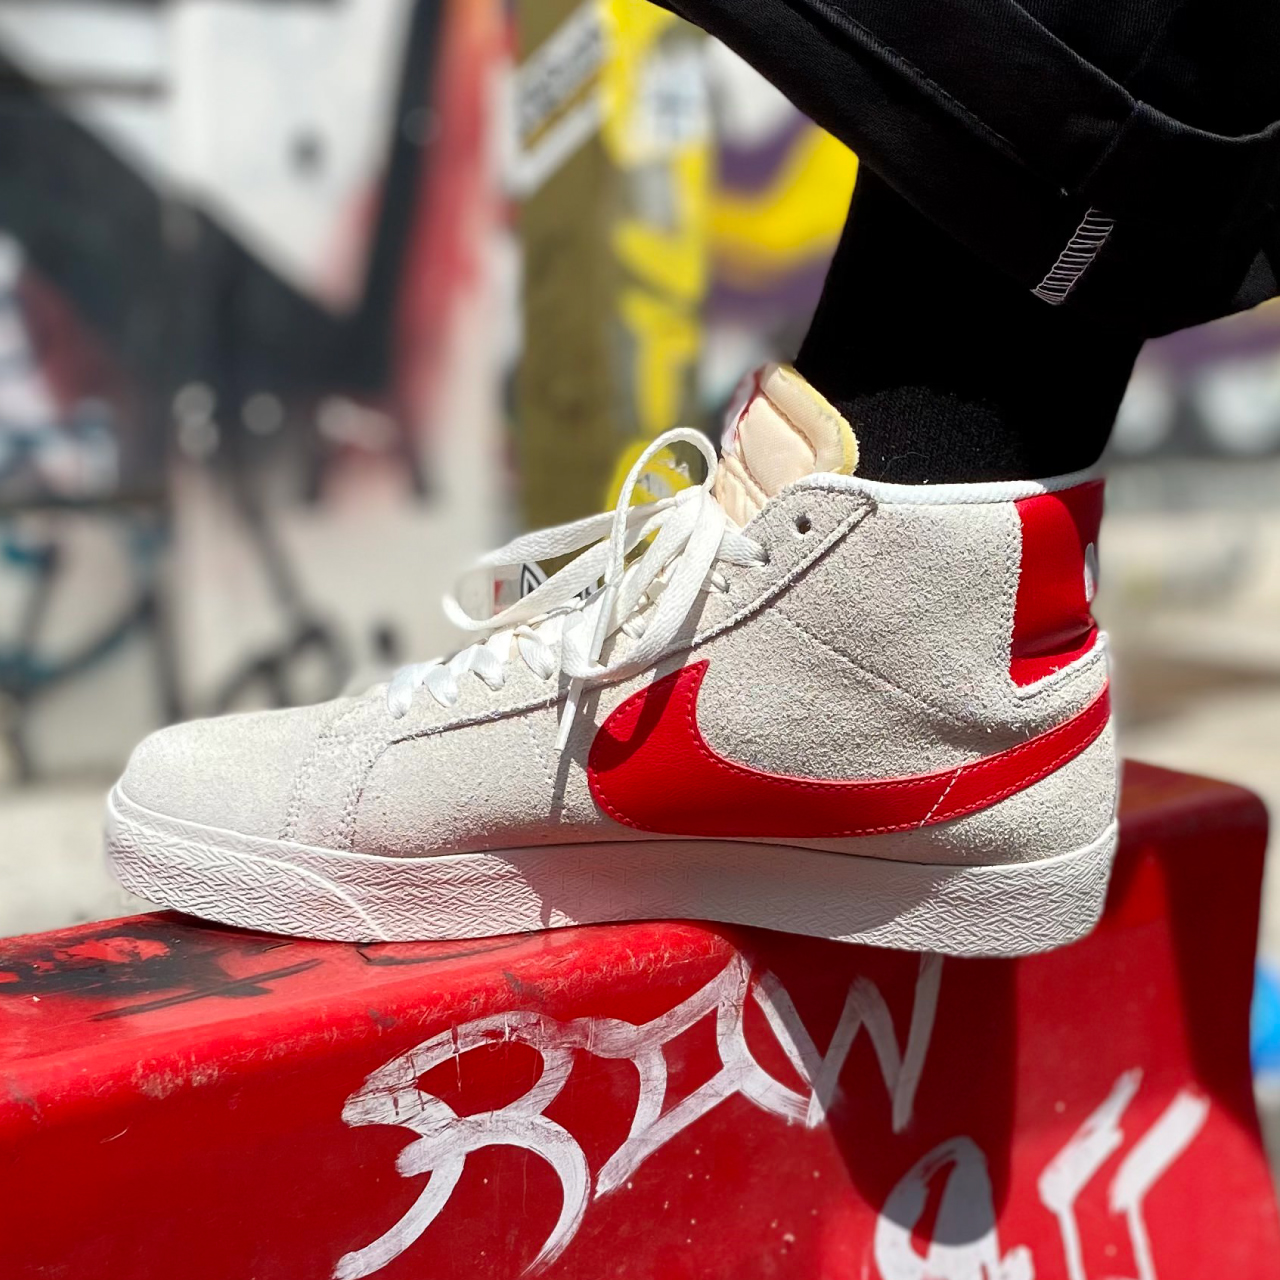 Nike Blazer Mid Sneakers in White and Red